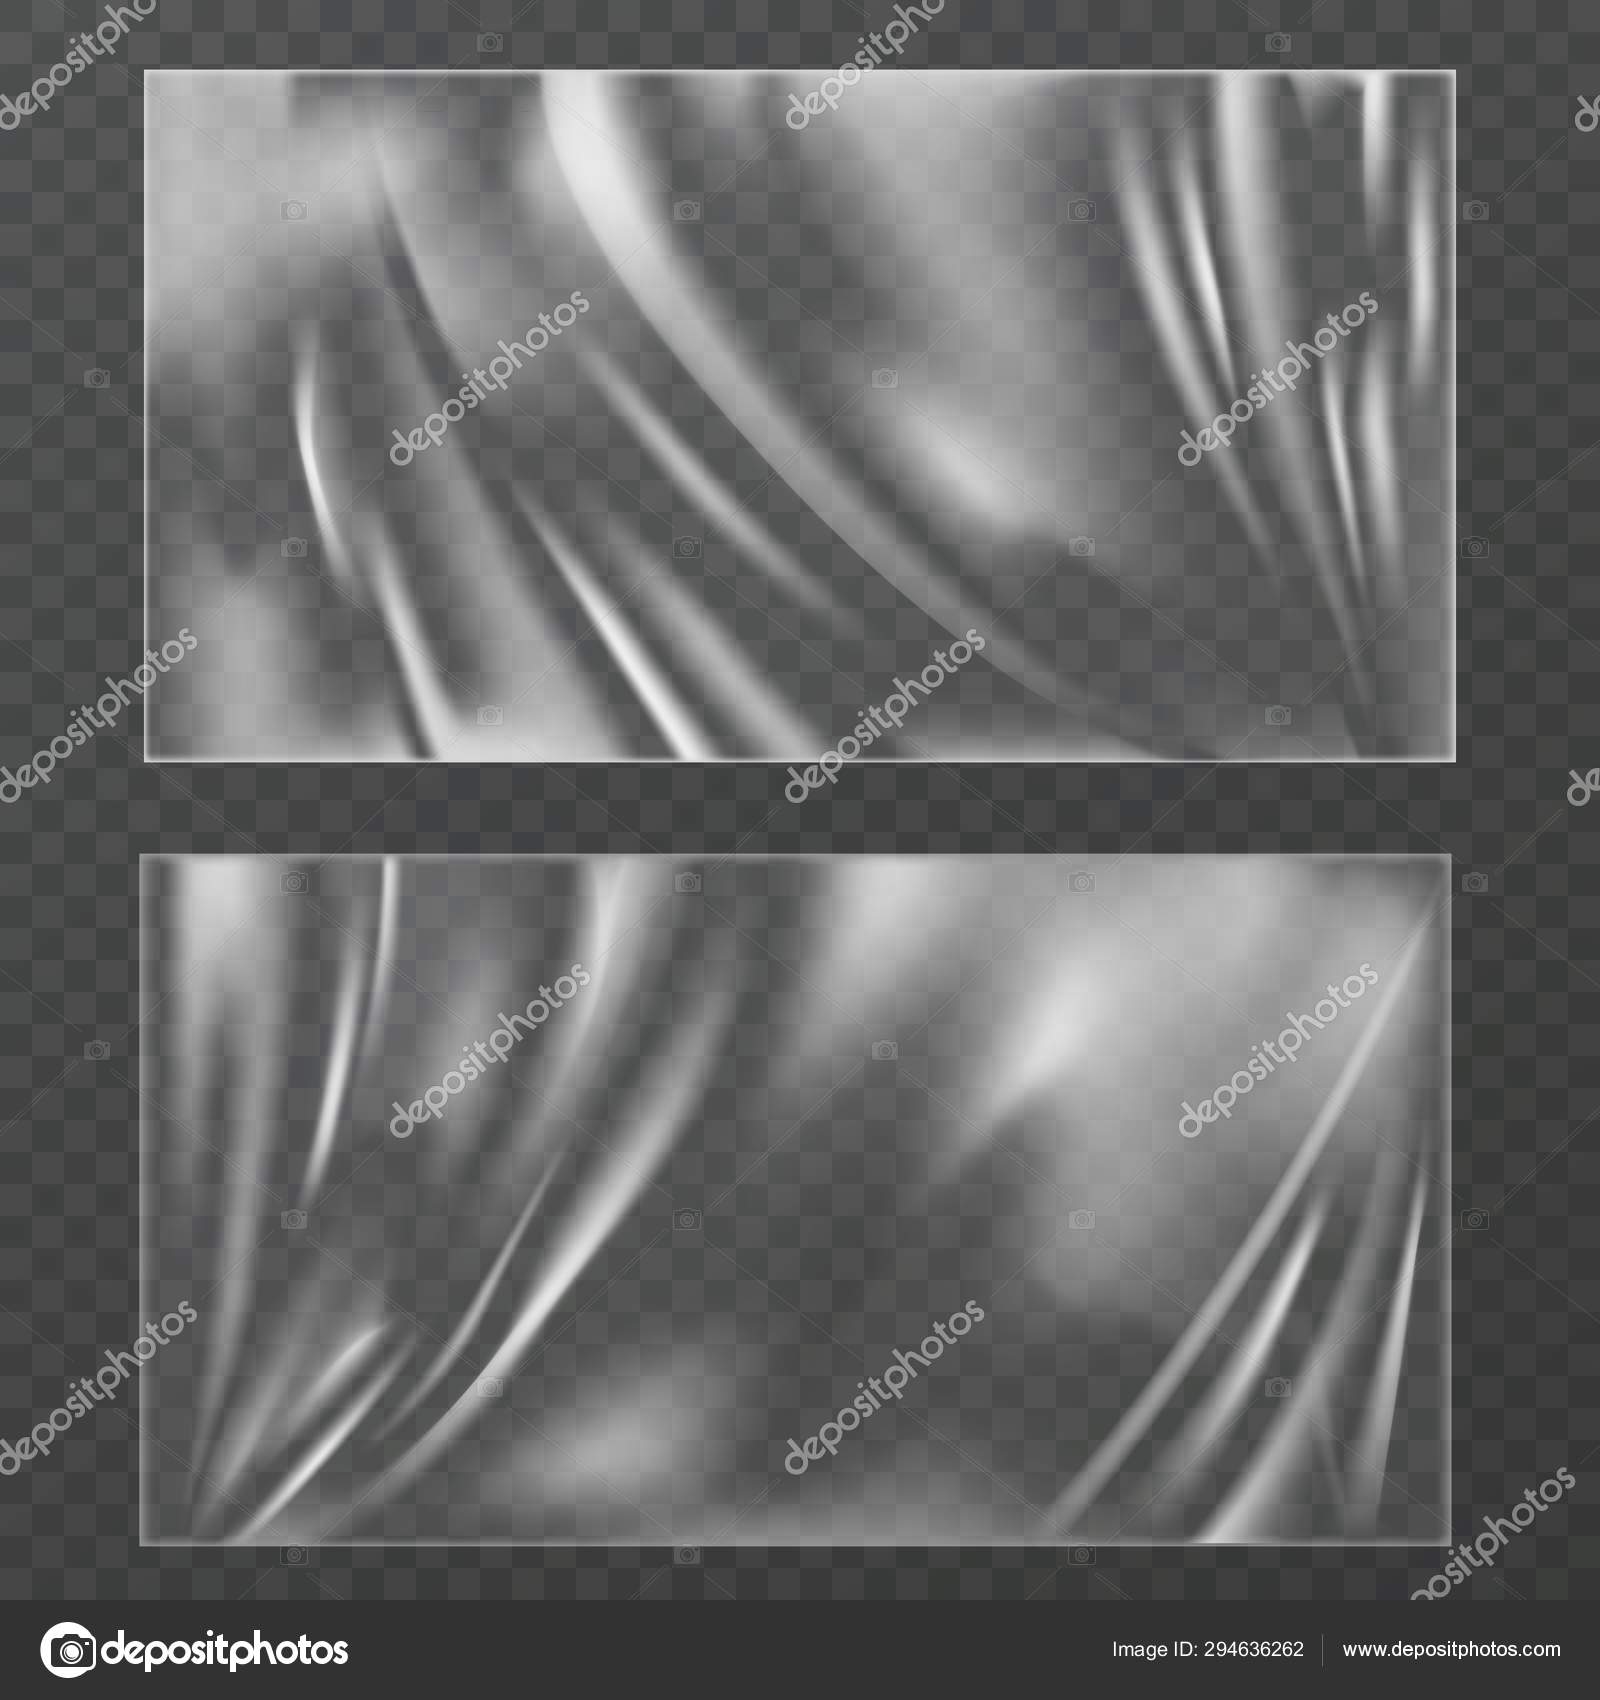 Download Plastic Texture Transparent Plastic Wrap For Food Container Vacuum Bag Polythene Wrinkled Cover Cellophane Surface Vector Mockups Vector Image By C Yummybuum Vector Stock 294636262